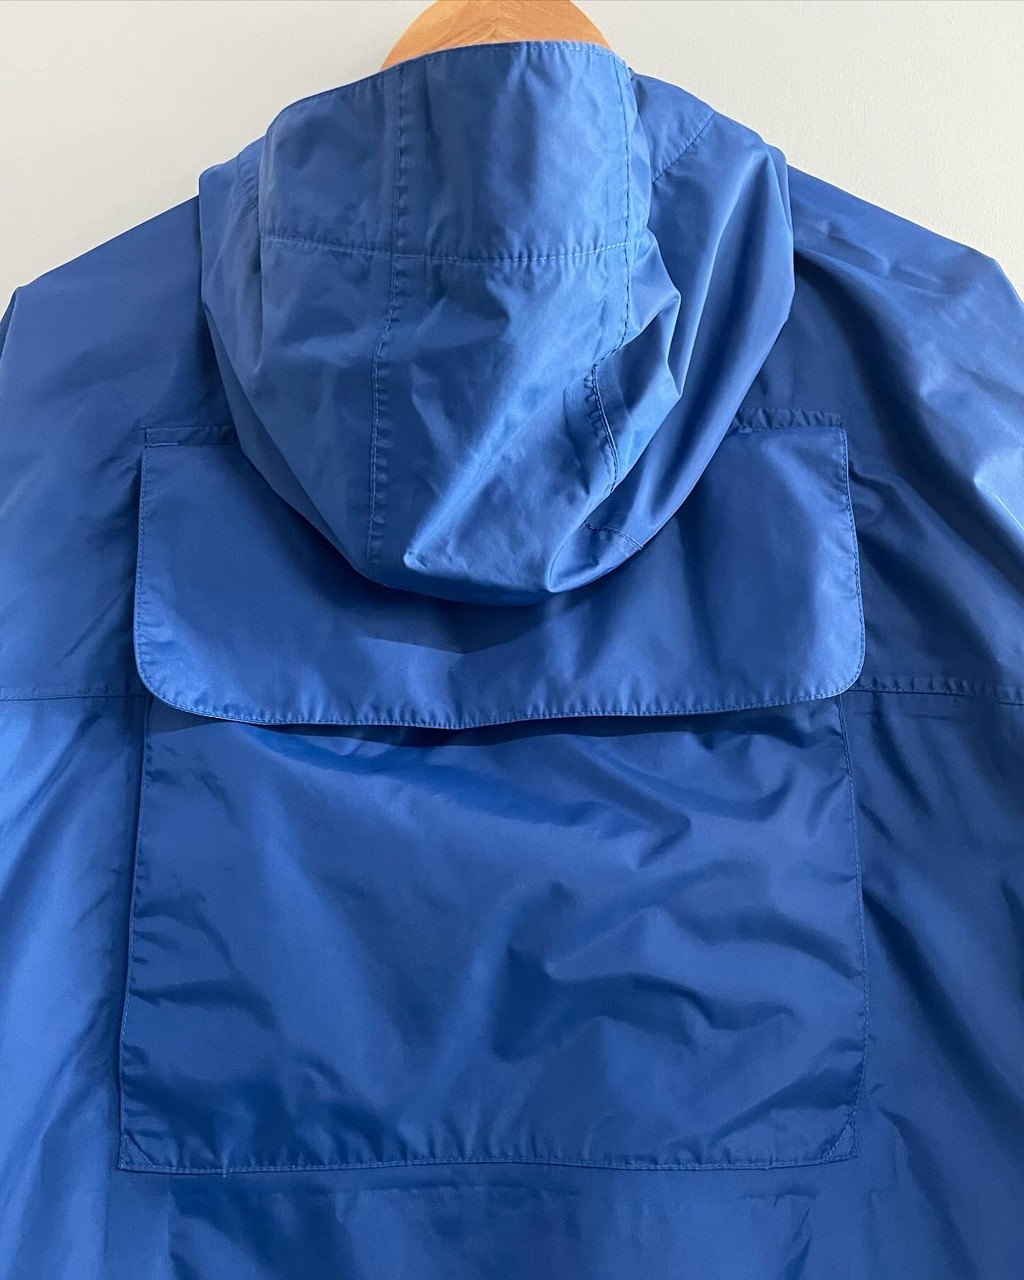 90s Patagonia SST Wading Jacket (105-110) : Share the vibe